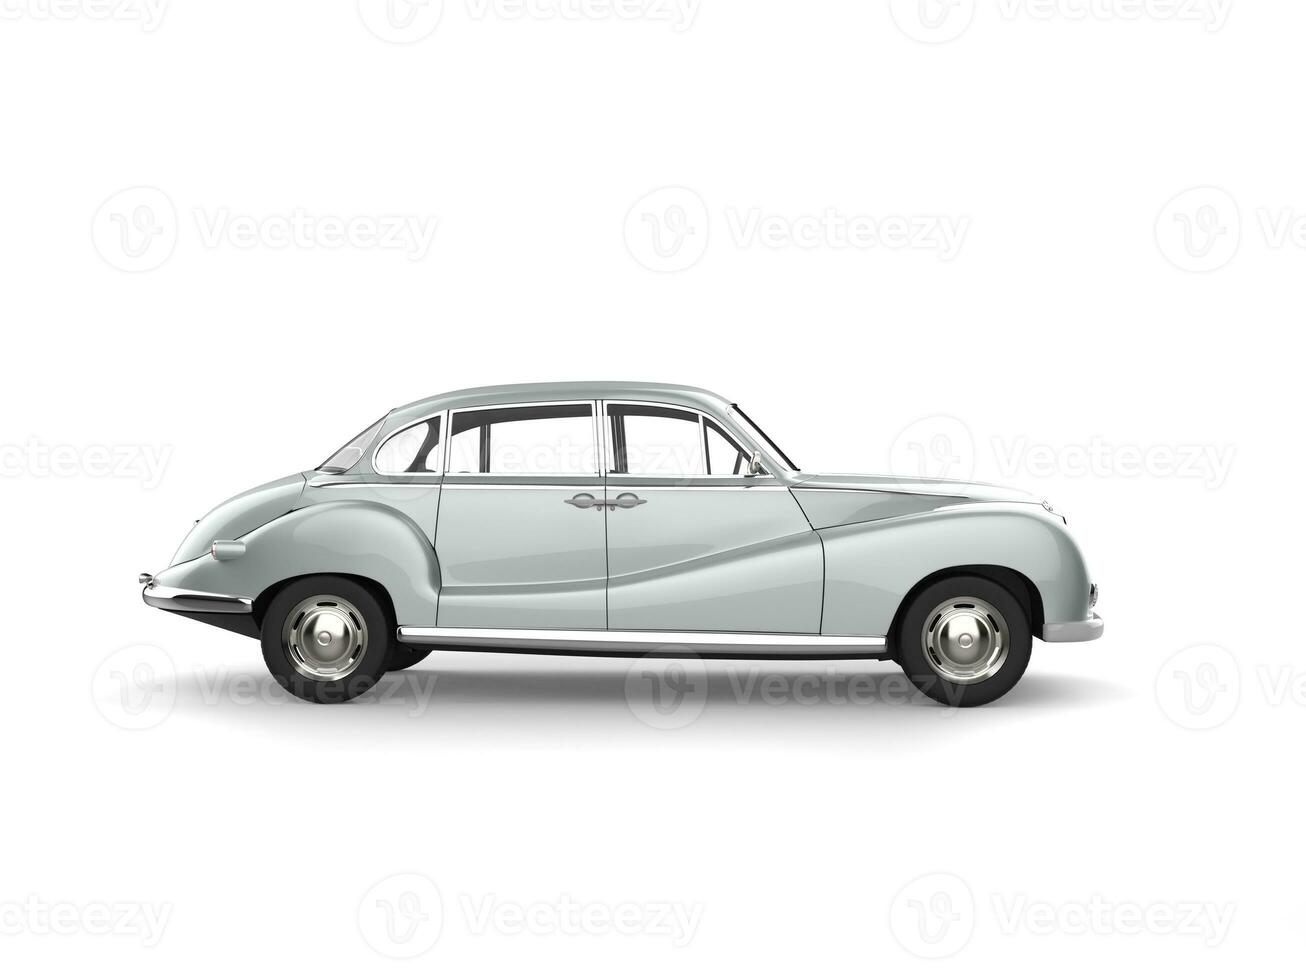 Cool silver vintage car - side view photo